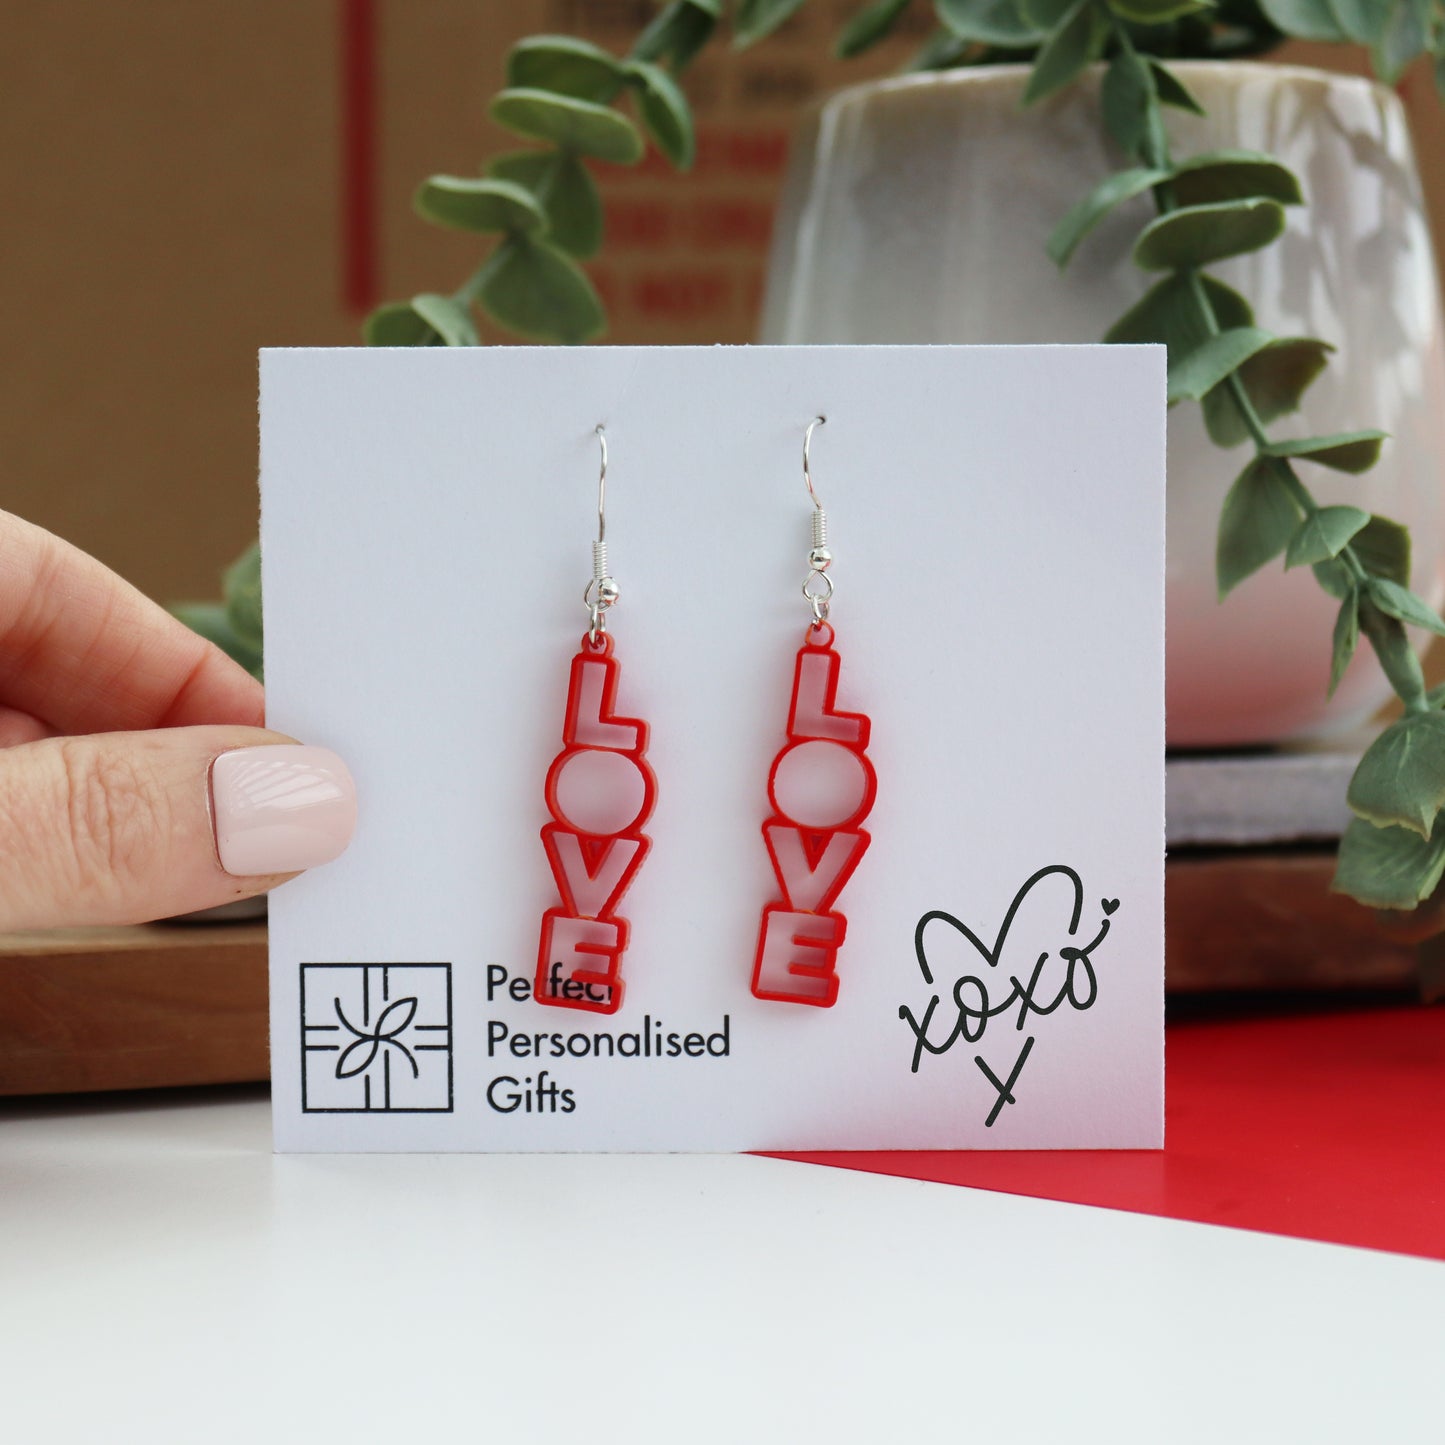 Love drop earrings cut from red acrylic on a white backing card with a xoxo design printed on the left bottom corner and the brand printed on the right bottom corner